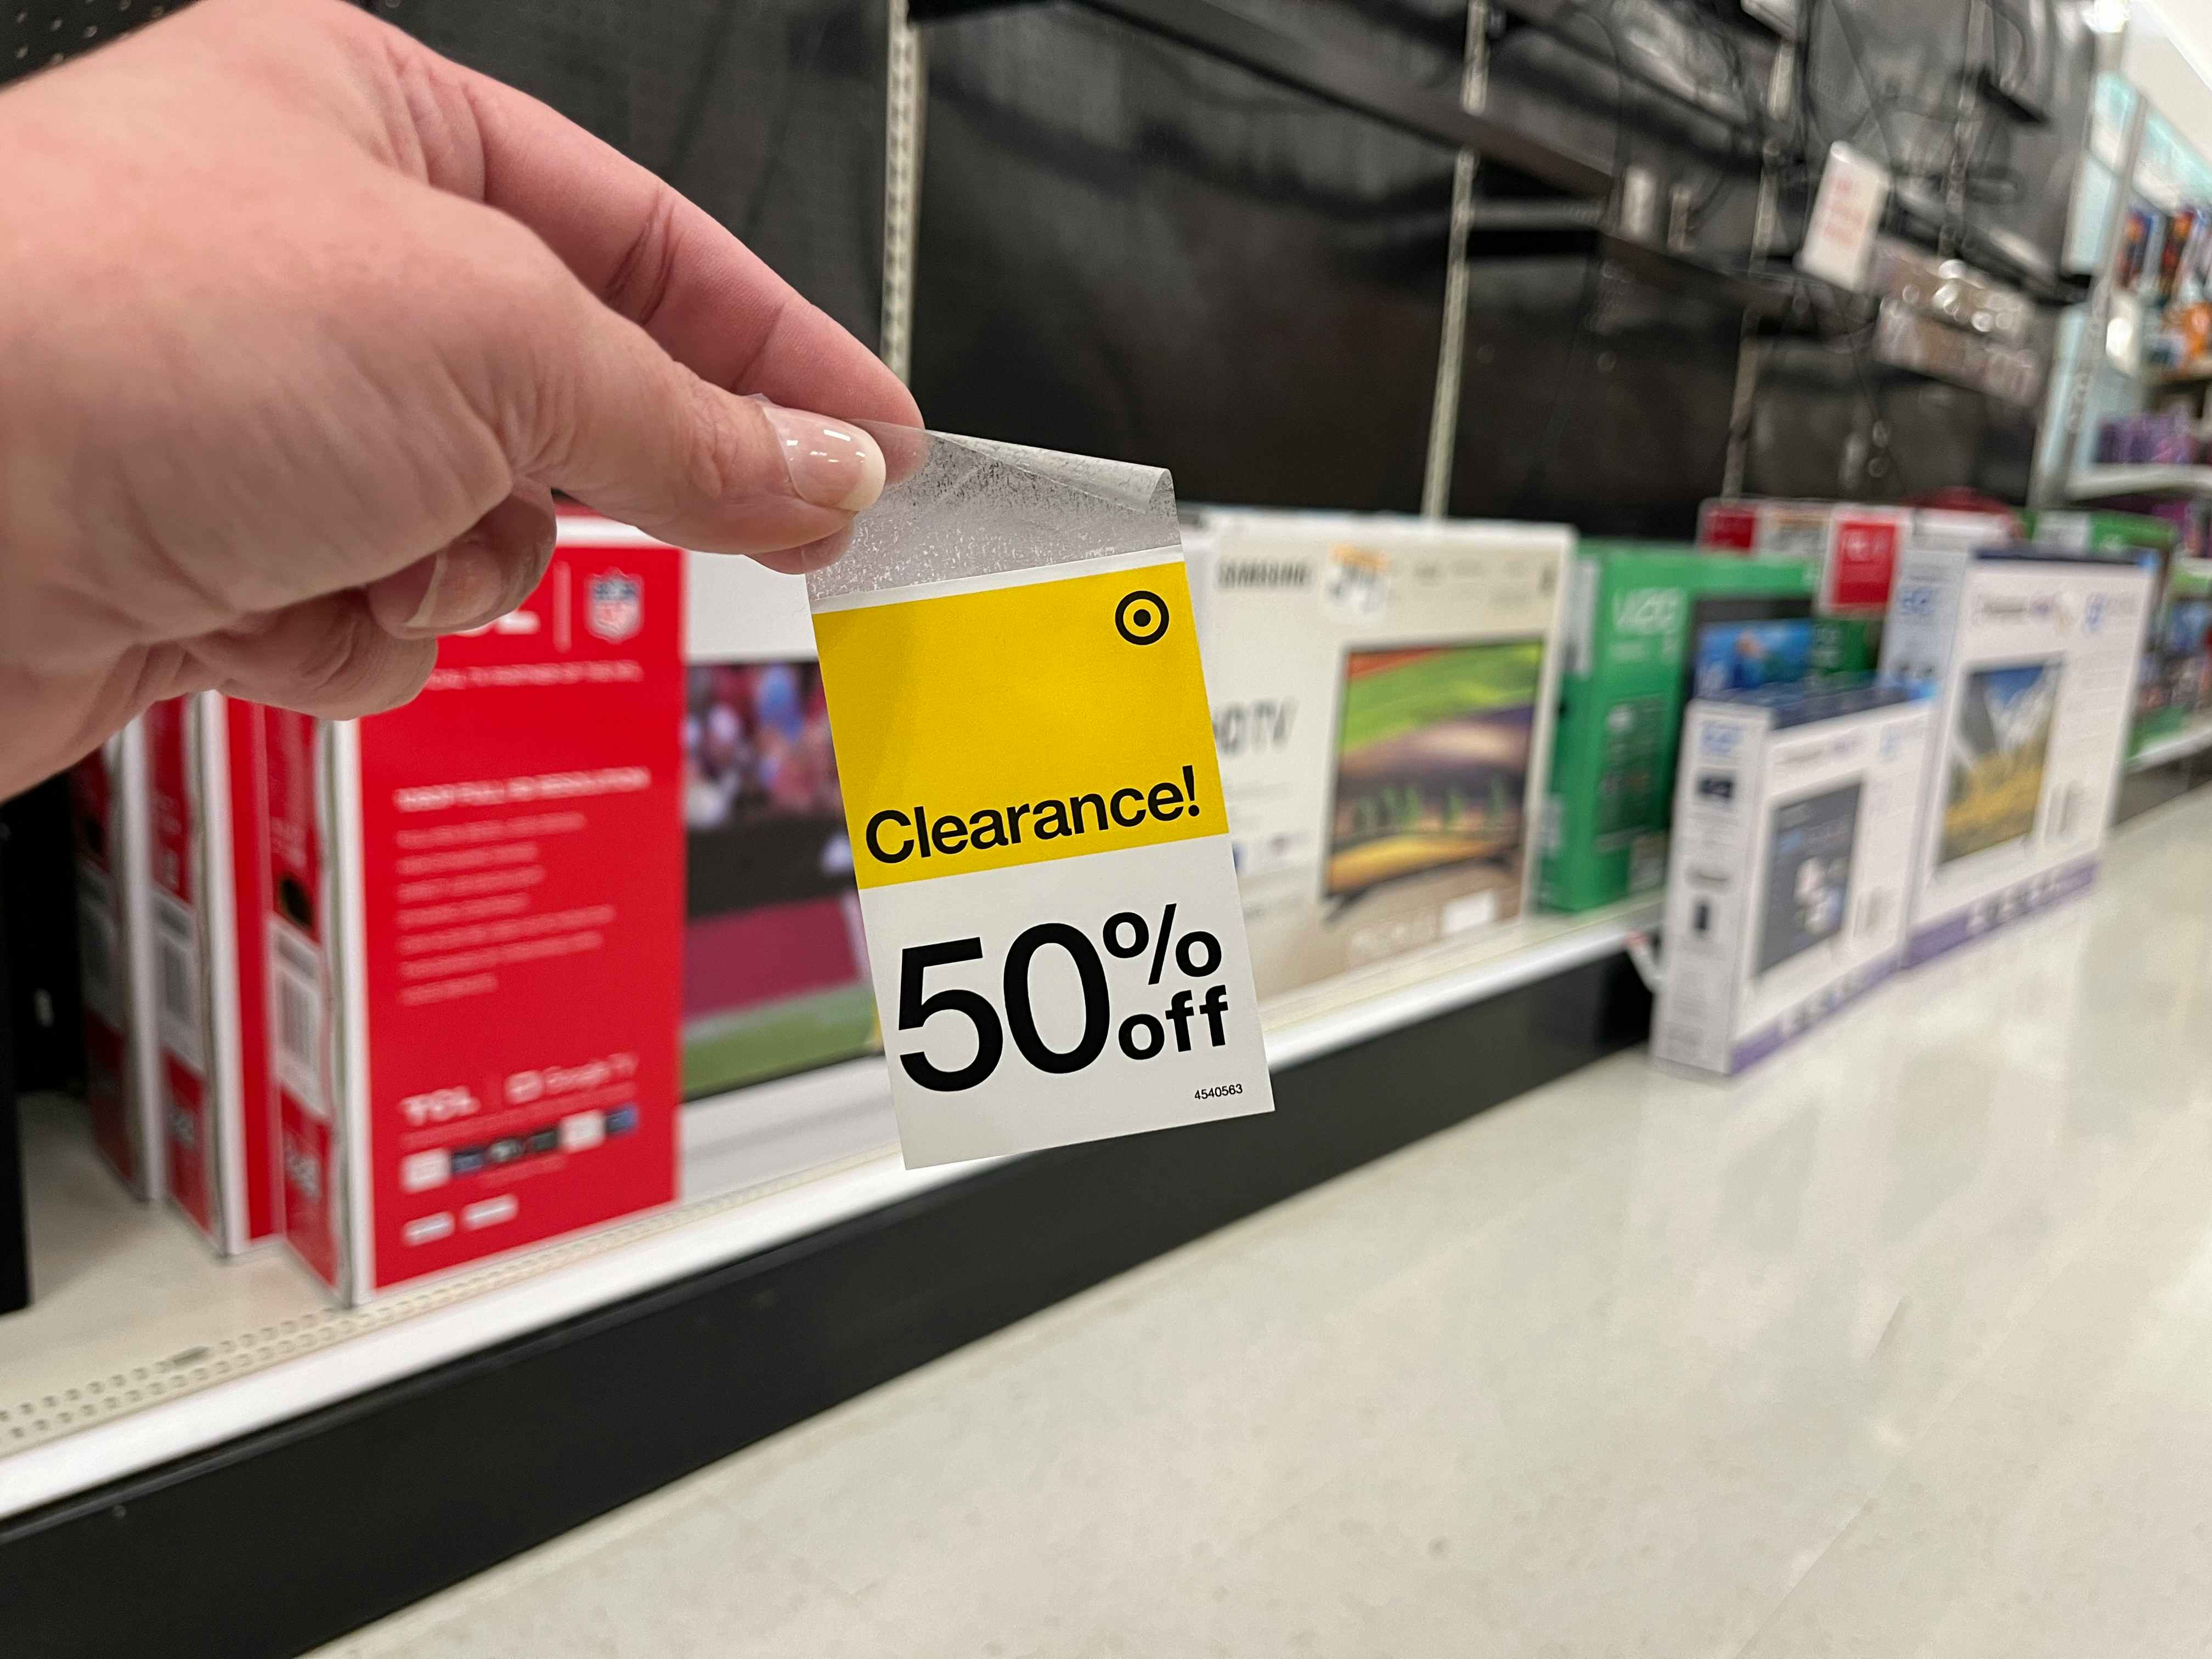 LG and Samsung TV Clearance for 50% Off at Target — $166 LG 50-Inch TV